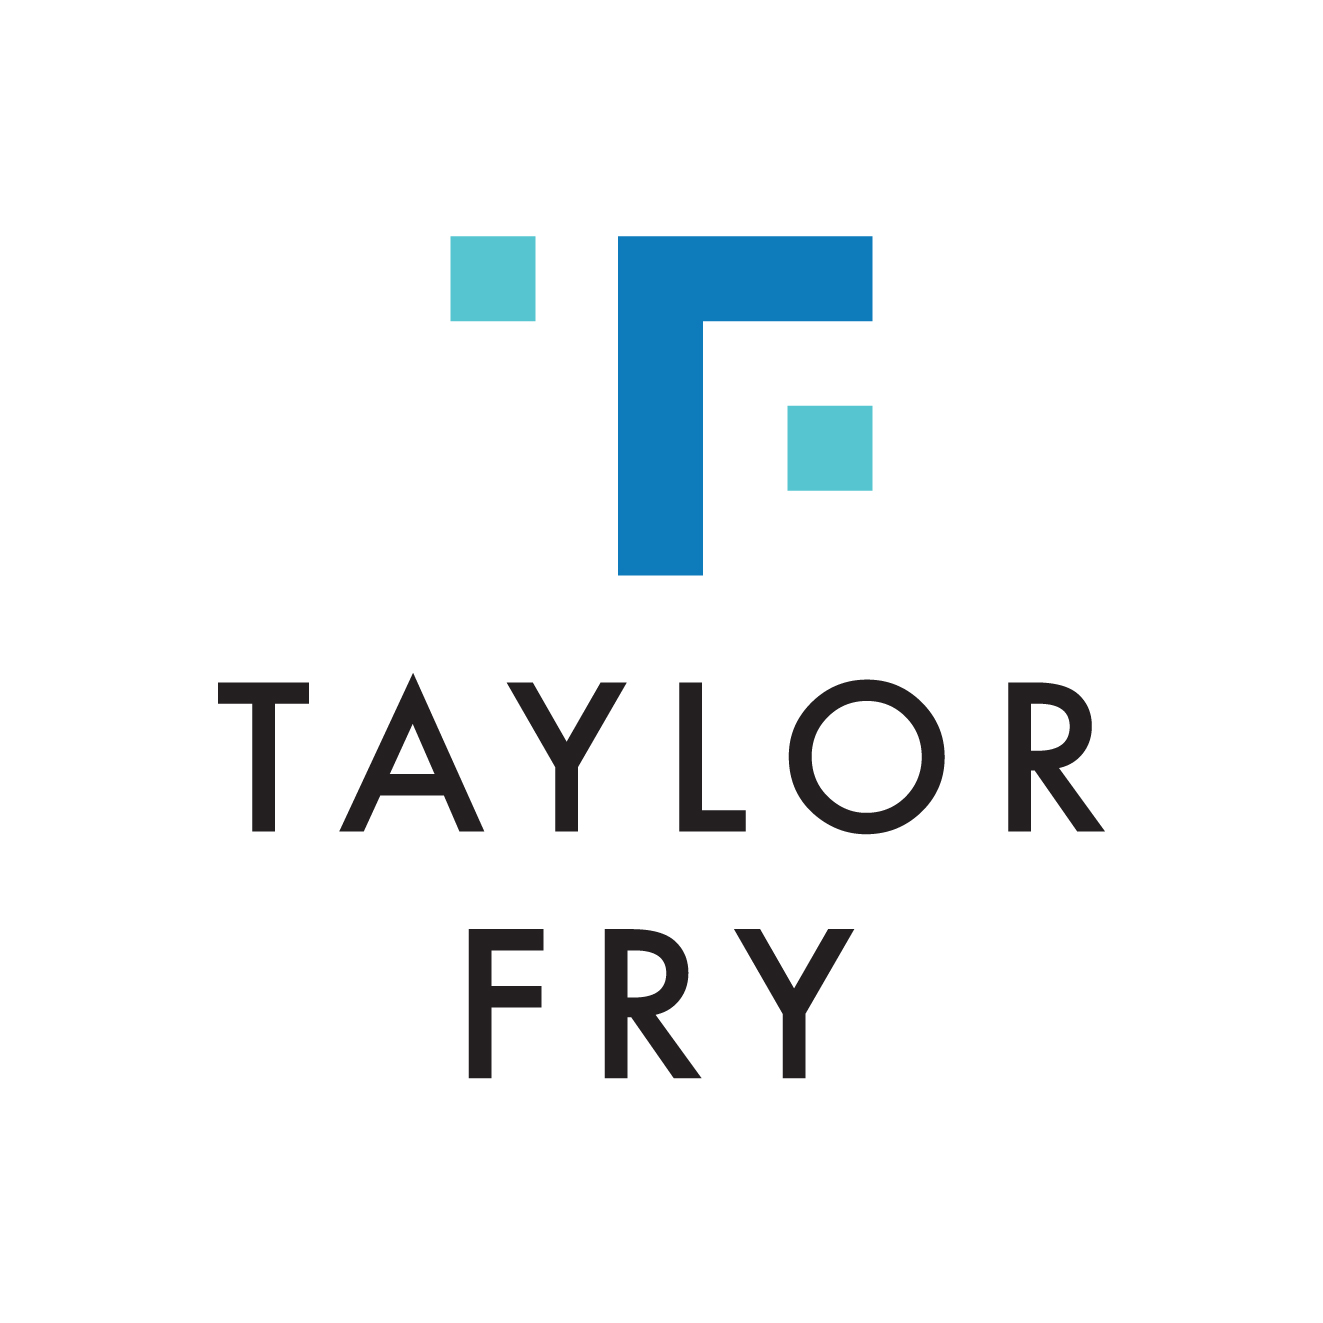 Taylor-Fry_highres_SQUARE